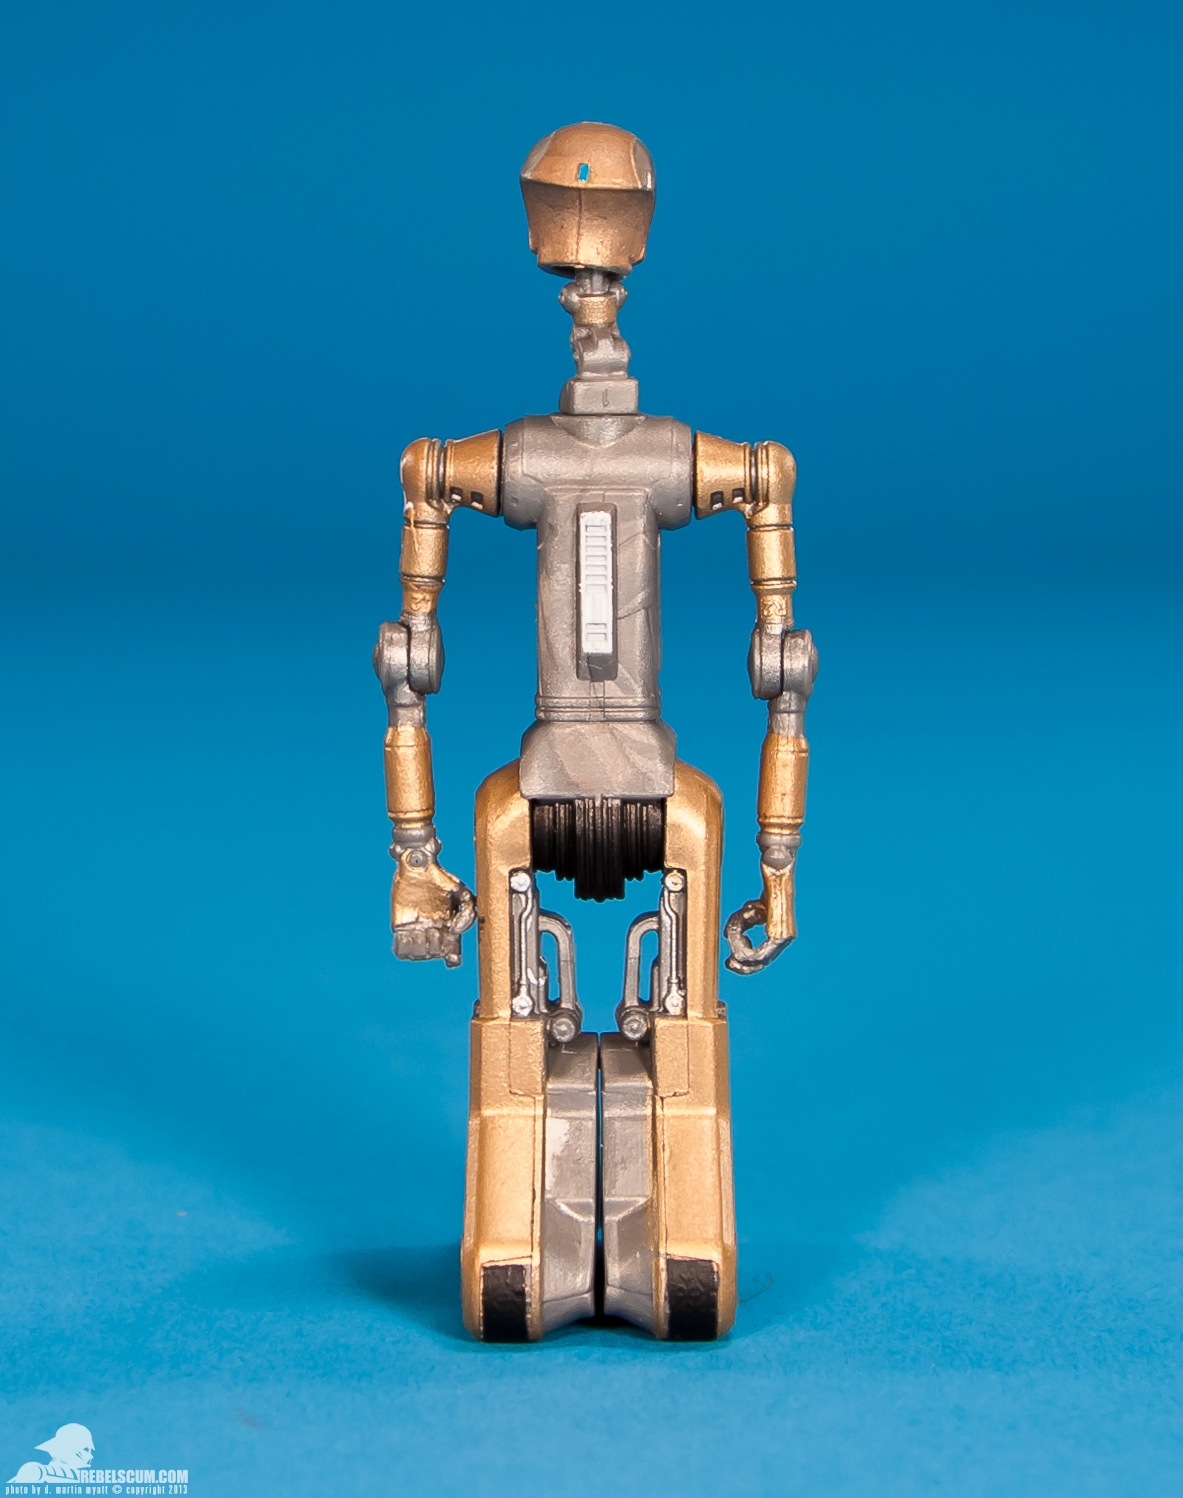 Amazon-Droid-Factory-Preview-Gallery-004.jpg